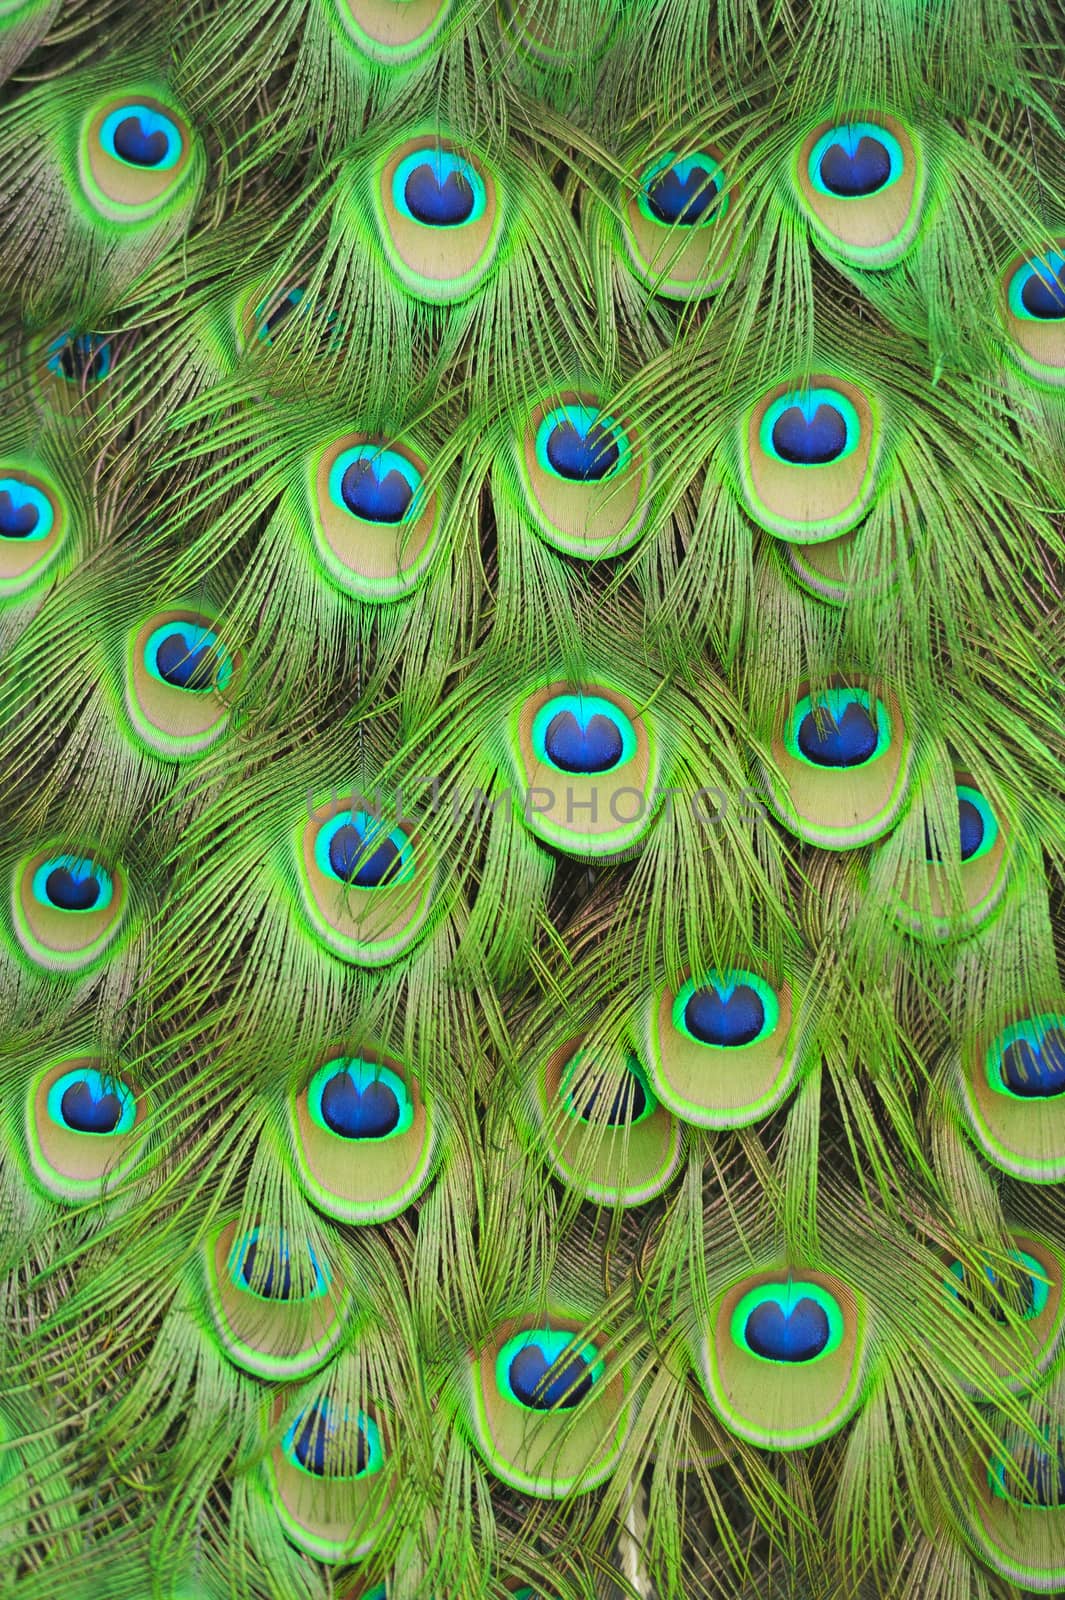 Peacock feathers by byrdyak